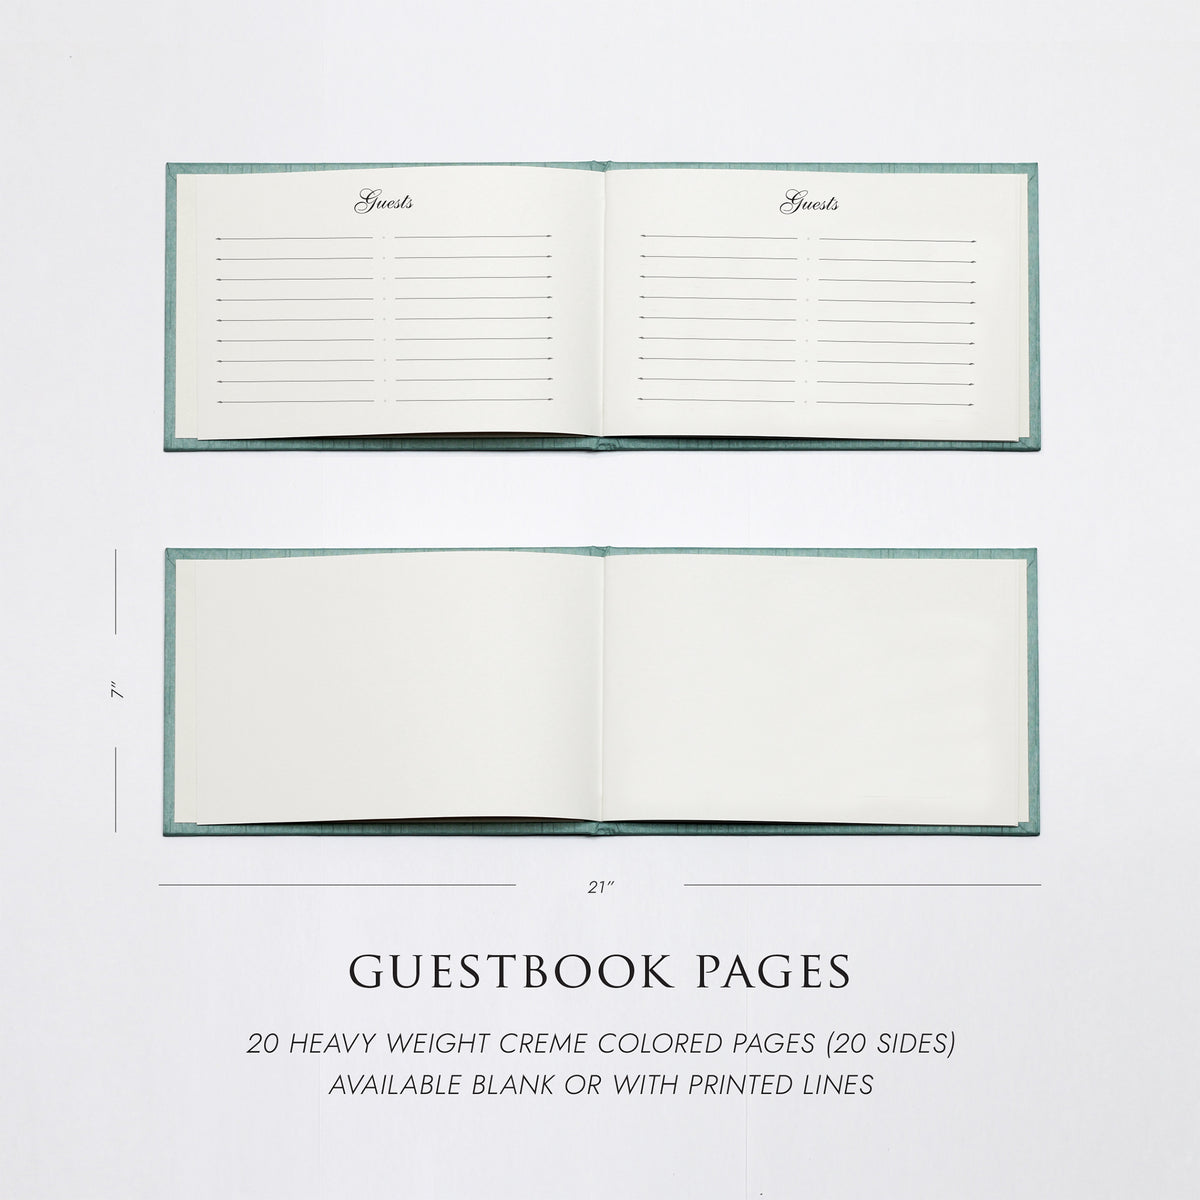 Guestbook Embossed with “Guests” with Jade Silk Cover